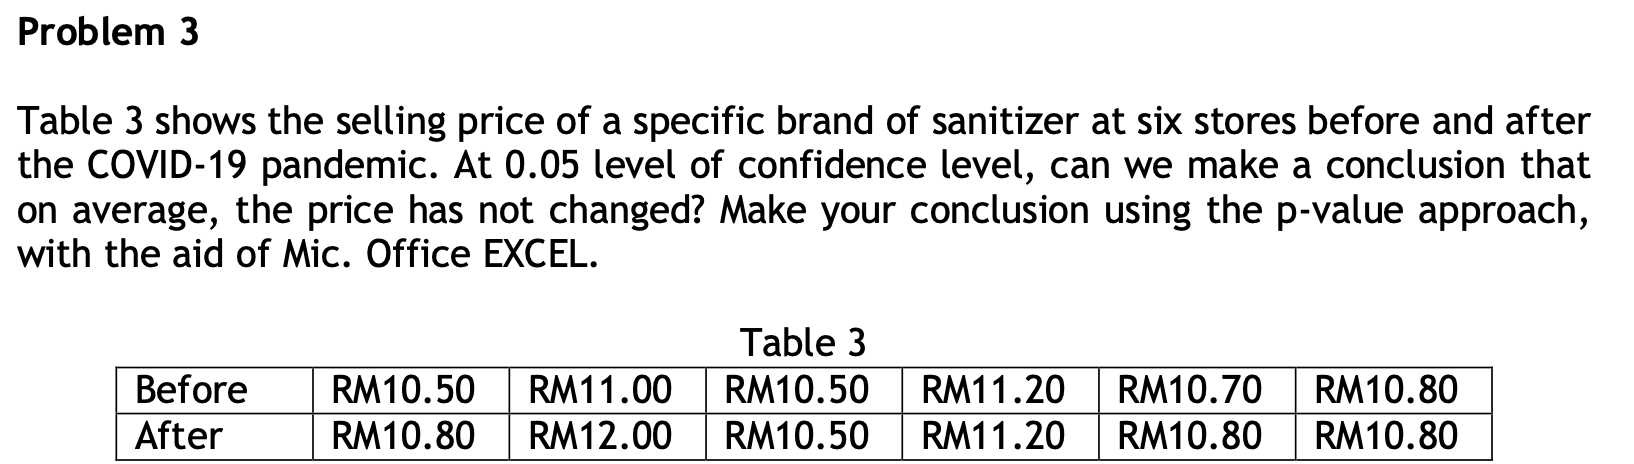 Problem 3
Table 3 shows the selling price of a specific brand of sanitizer at six stores before and after
the COVID-19 pandemic. At 0.05 level of confidence level, can we make a conclusion that
on average, the price has not changed? Make your conclusion using the p-value approach,
with the aid of Mic. Office EXCEL.
